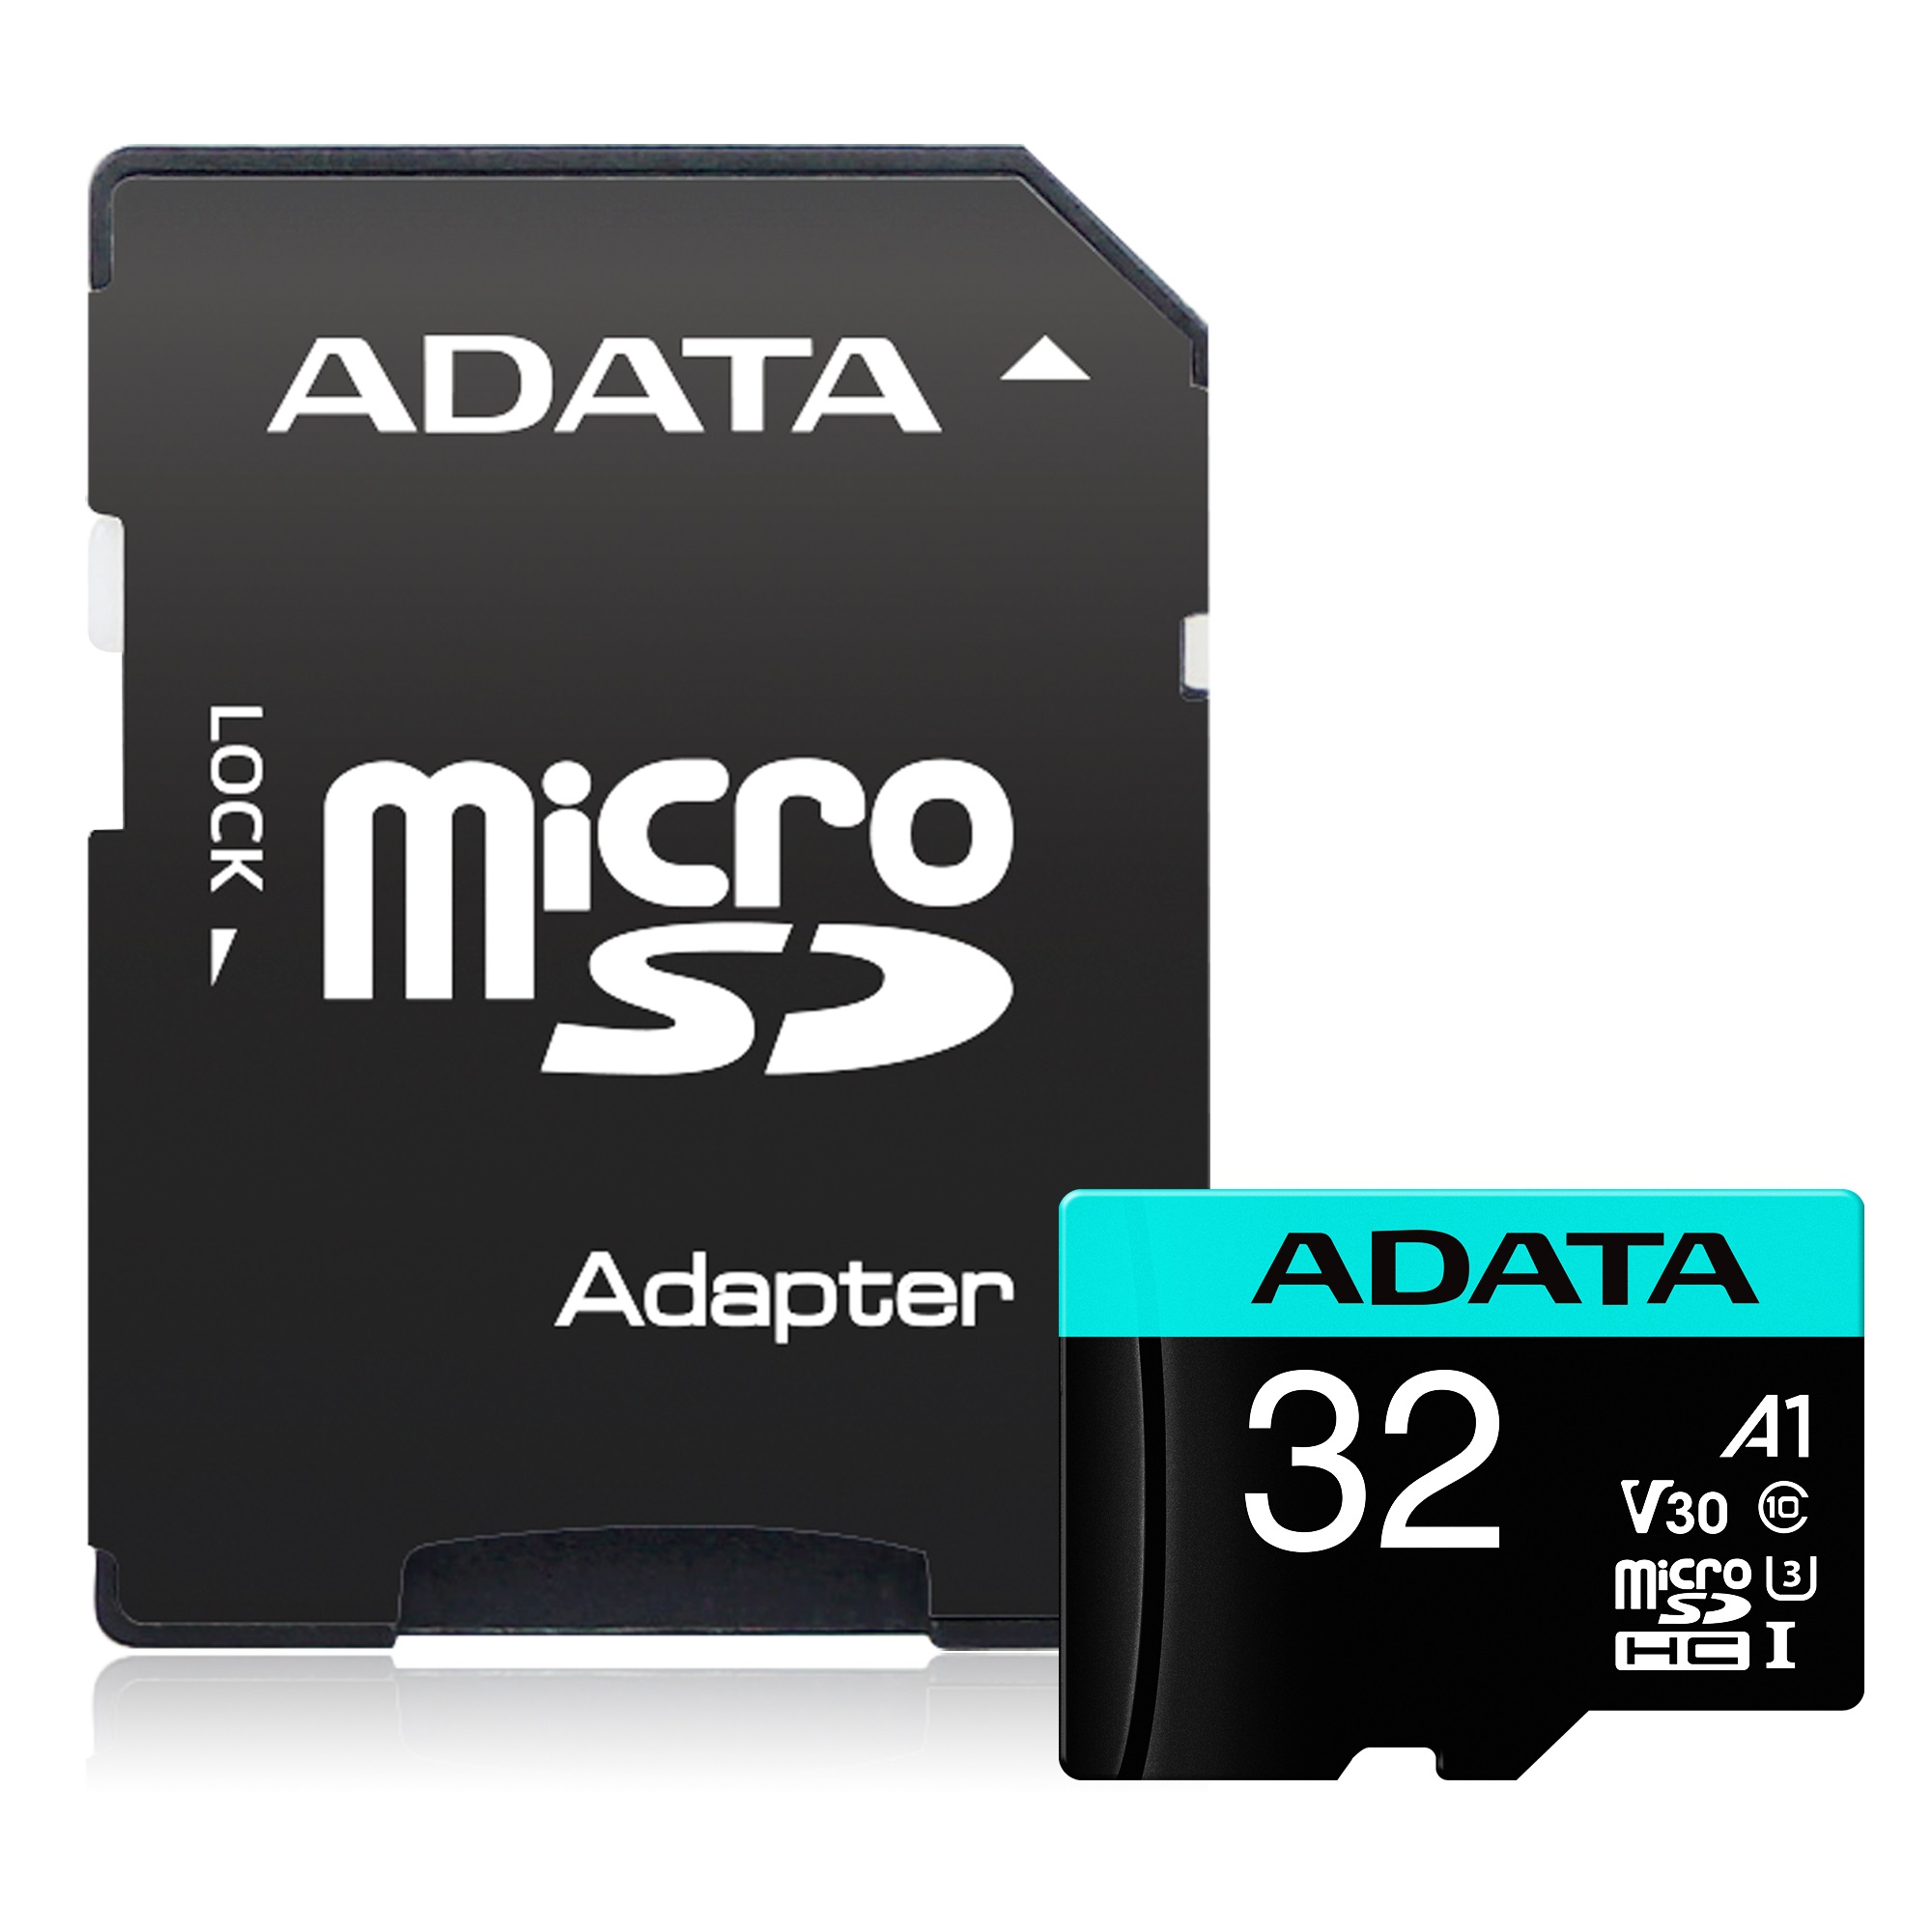 32GB AData Premier Pro microSDHC CL10 UHS-I U3 V30 A2 Memory Card with SD Adapter - image 2 of 4